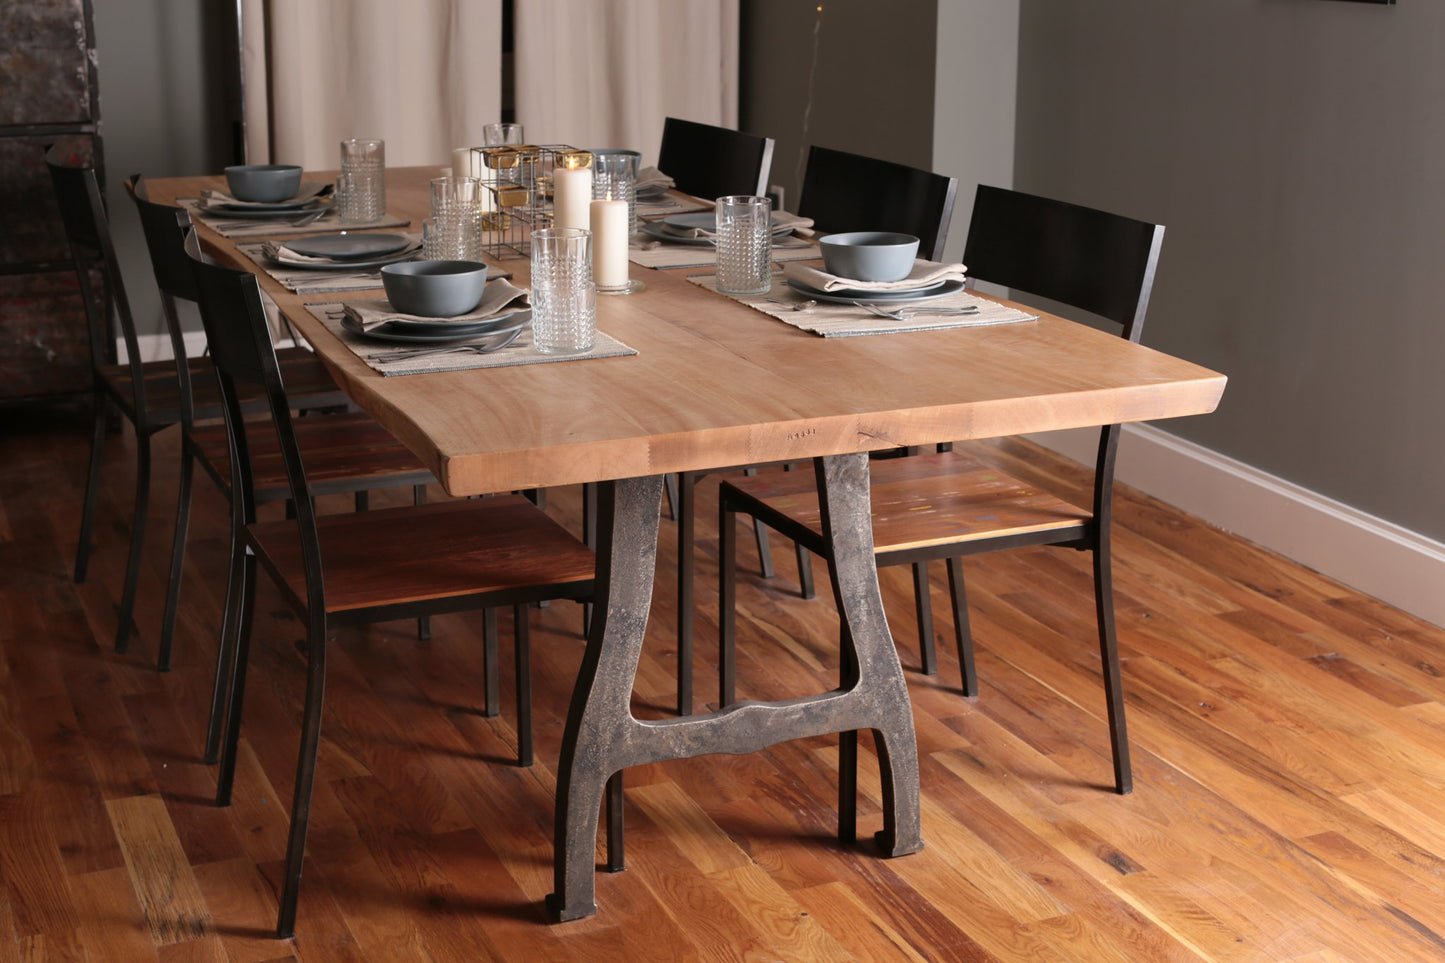 NEW Derby Dining Table